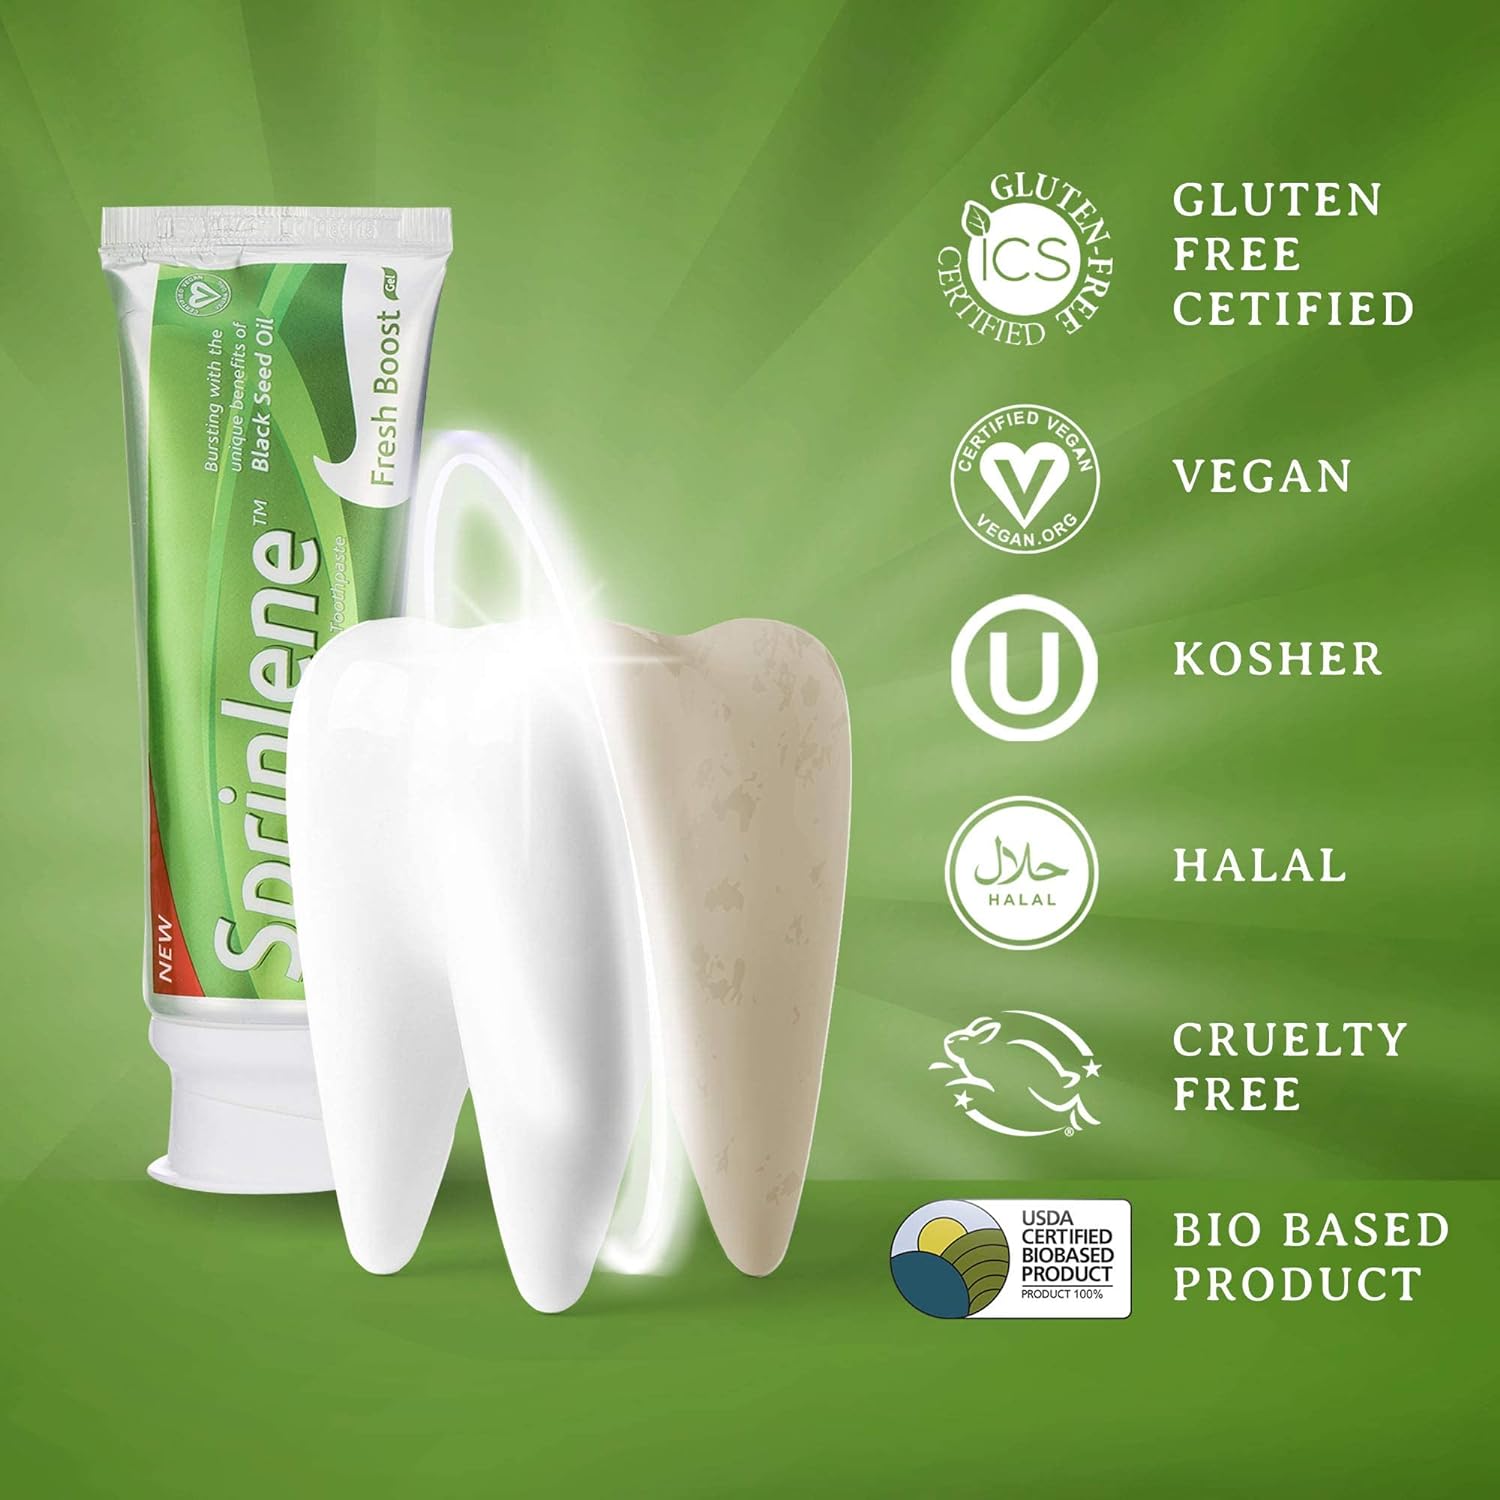 SprinJene Fluoride Toothpaste with Patented Black Seed Oil and Zinc - Certified Vegan, Cruelty-Free, Gluten-Free, Kosher, Halal, Natural Teeth Whitening Toothpaste 2 Pack (Fresh Boost) : Health & Household